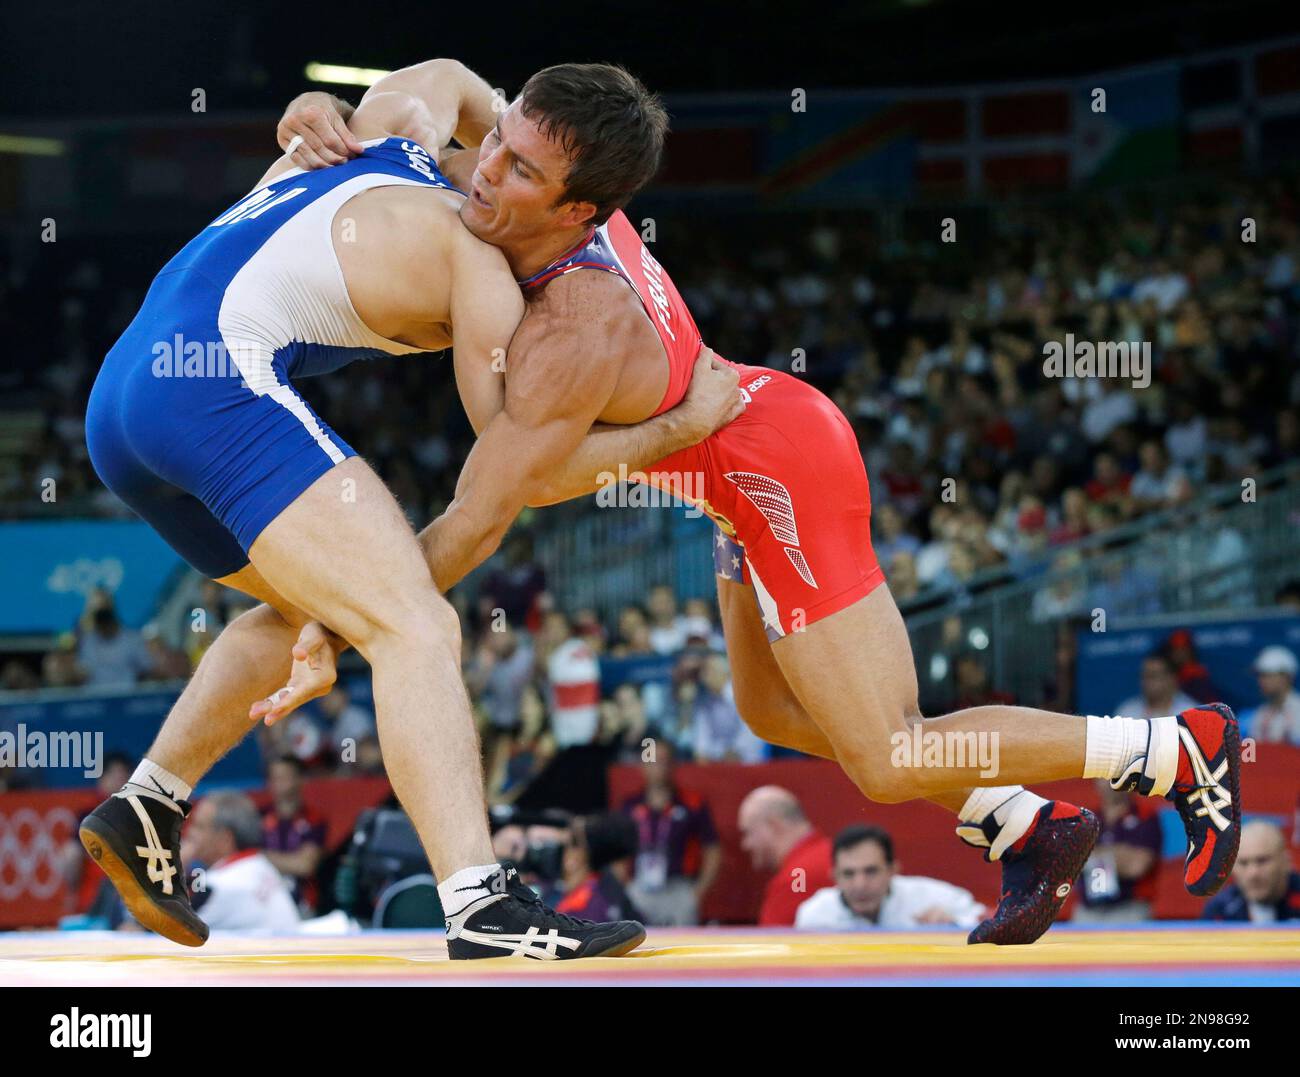 Jared Frayer of the United States, competes with Ali Shabanau of Belarus, (in blue) during their 66-kg freestyle wrestling match at the 2012 Summer Olympics, Sunday, Aug